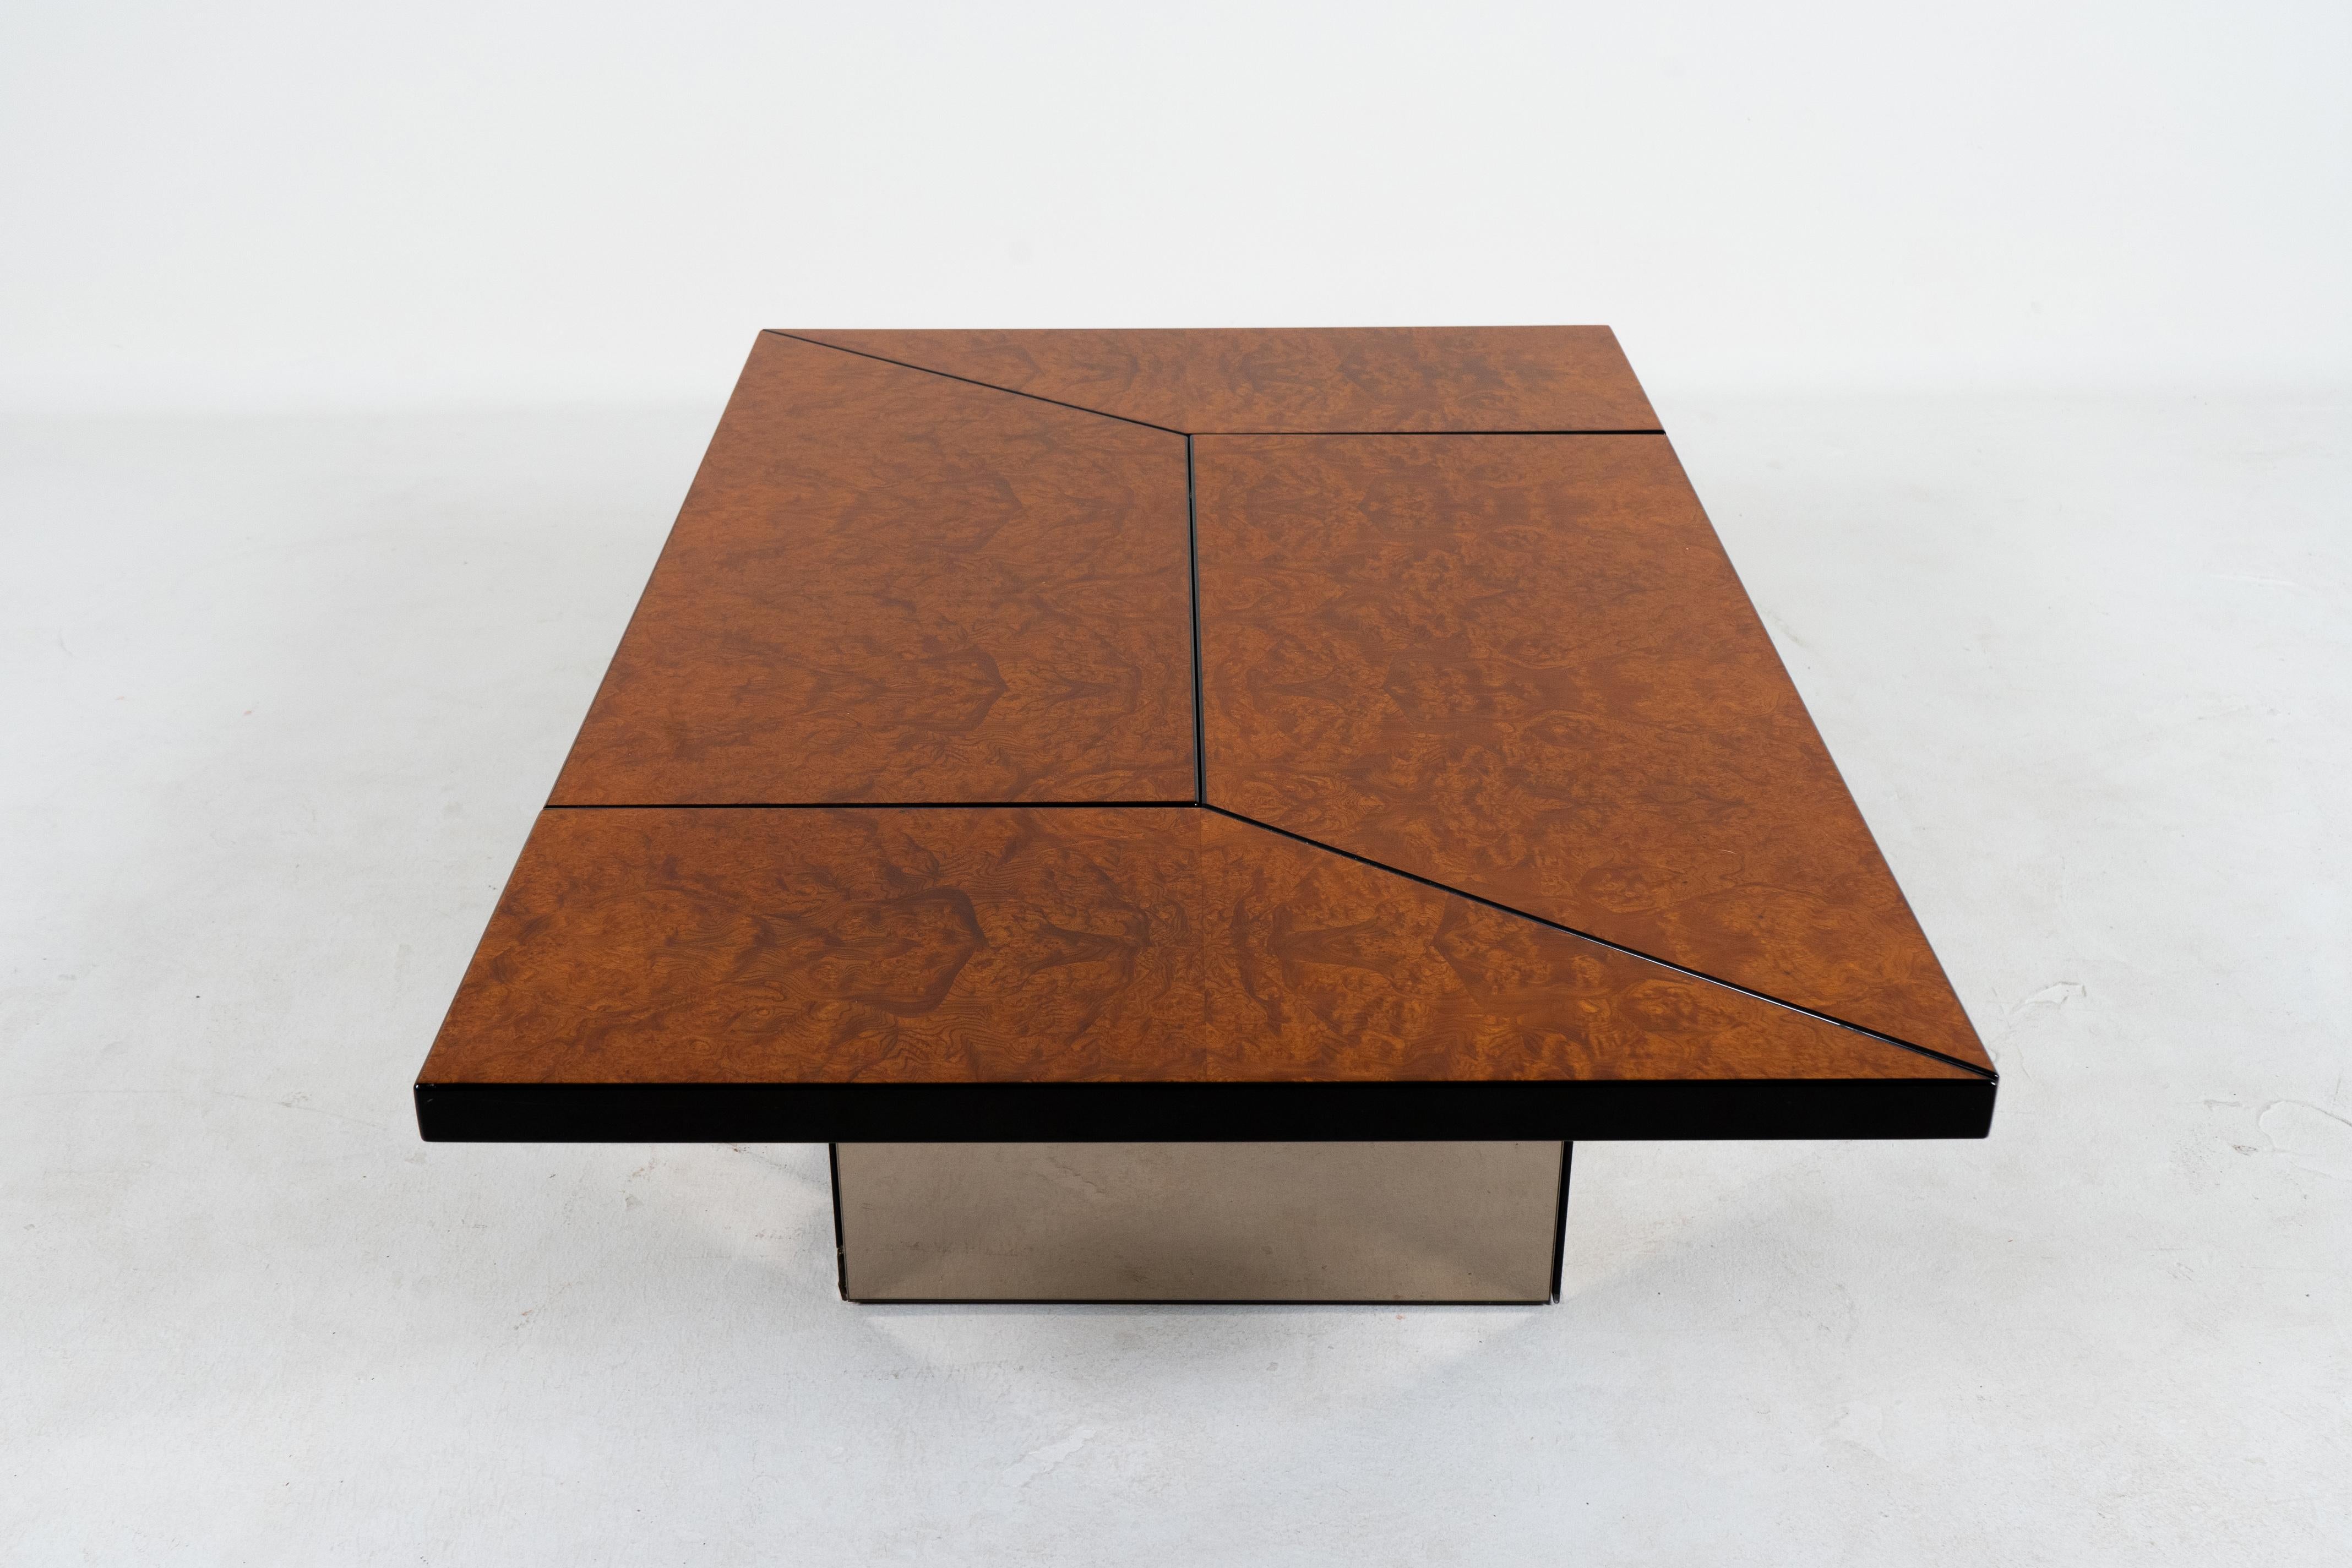 20th Century A Burl Wood Sliding Coffee Table or Bar by Paul Michel, Belgium c.1970 For Sale